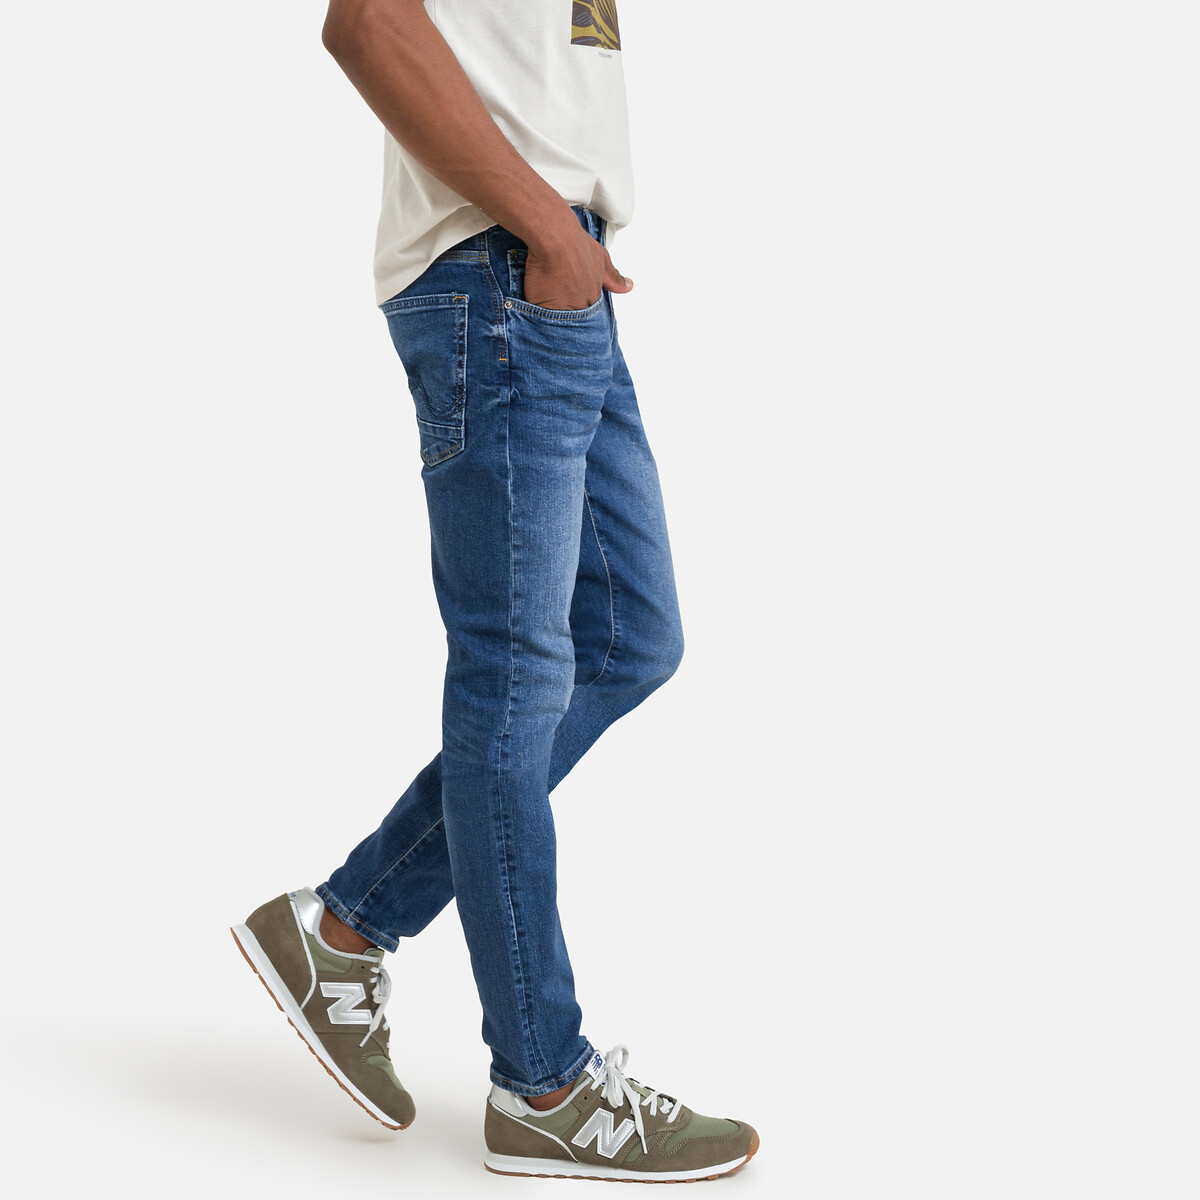 Supreme Stretch Seaham Jeans in Slim Fit and Mid Rise